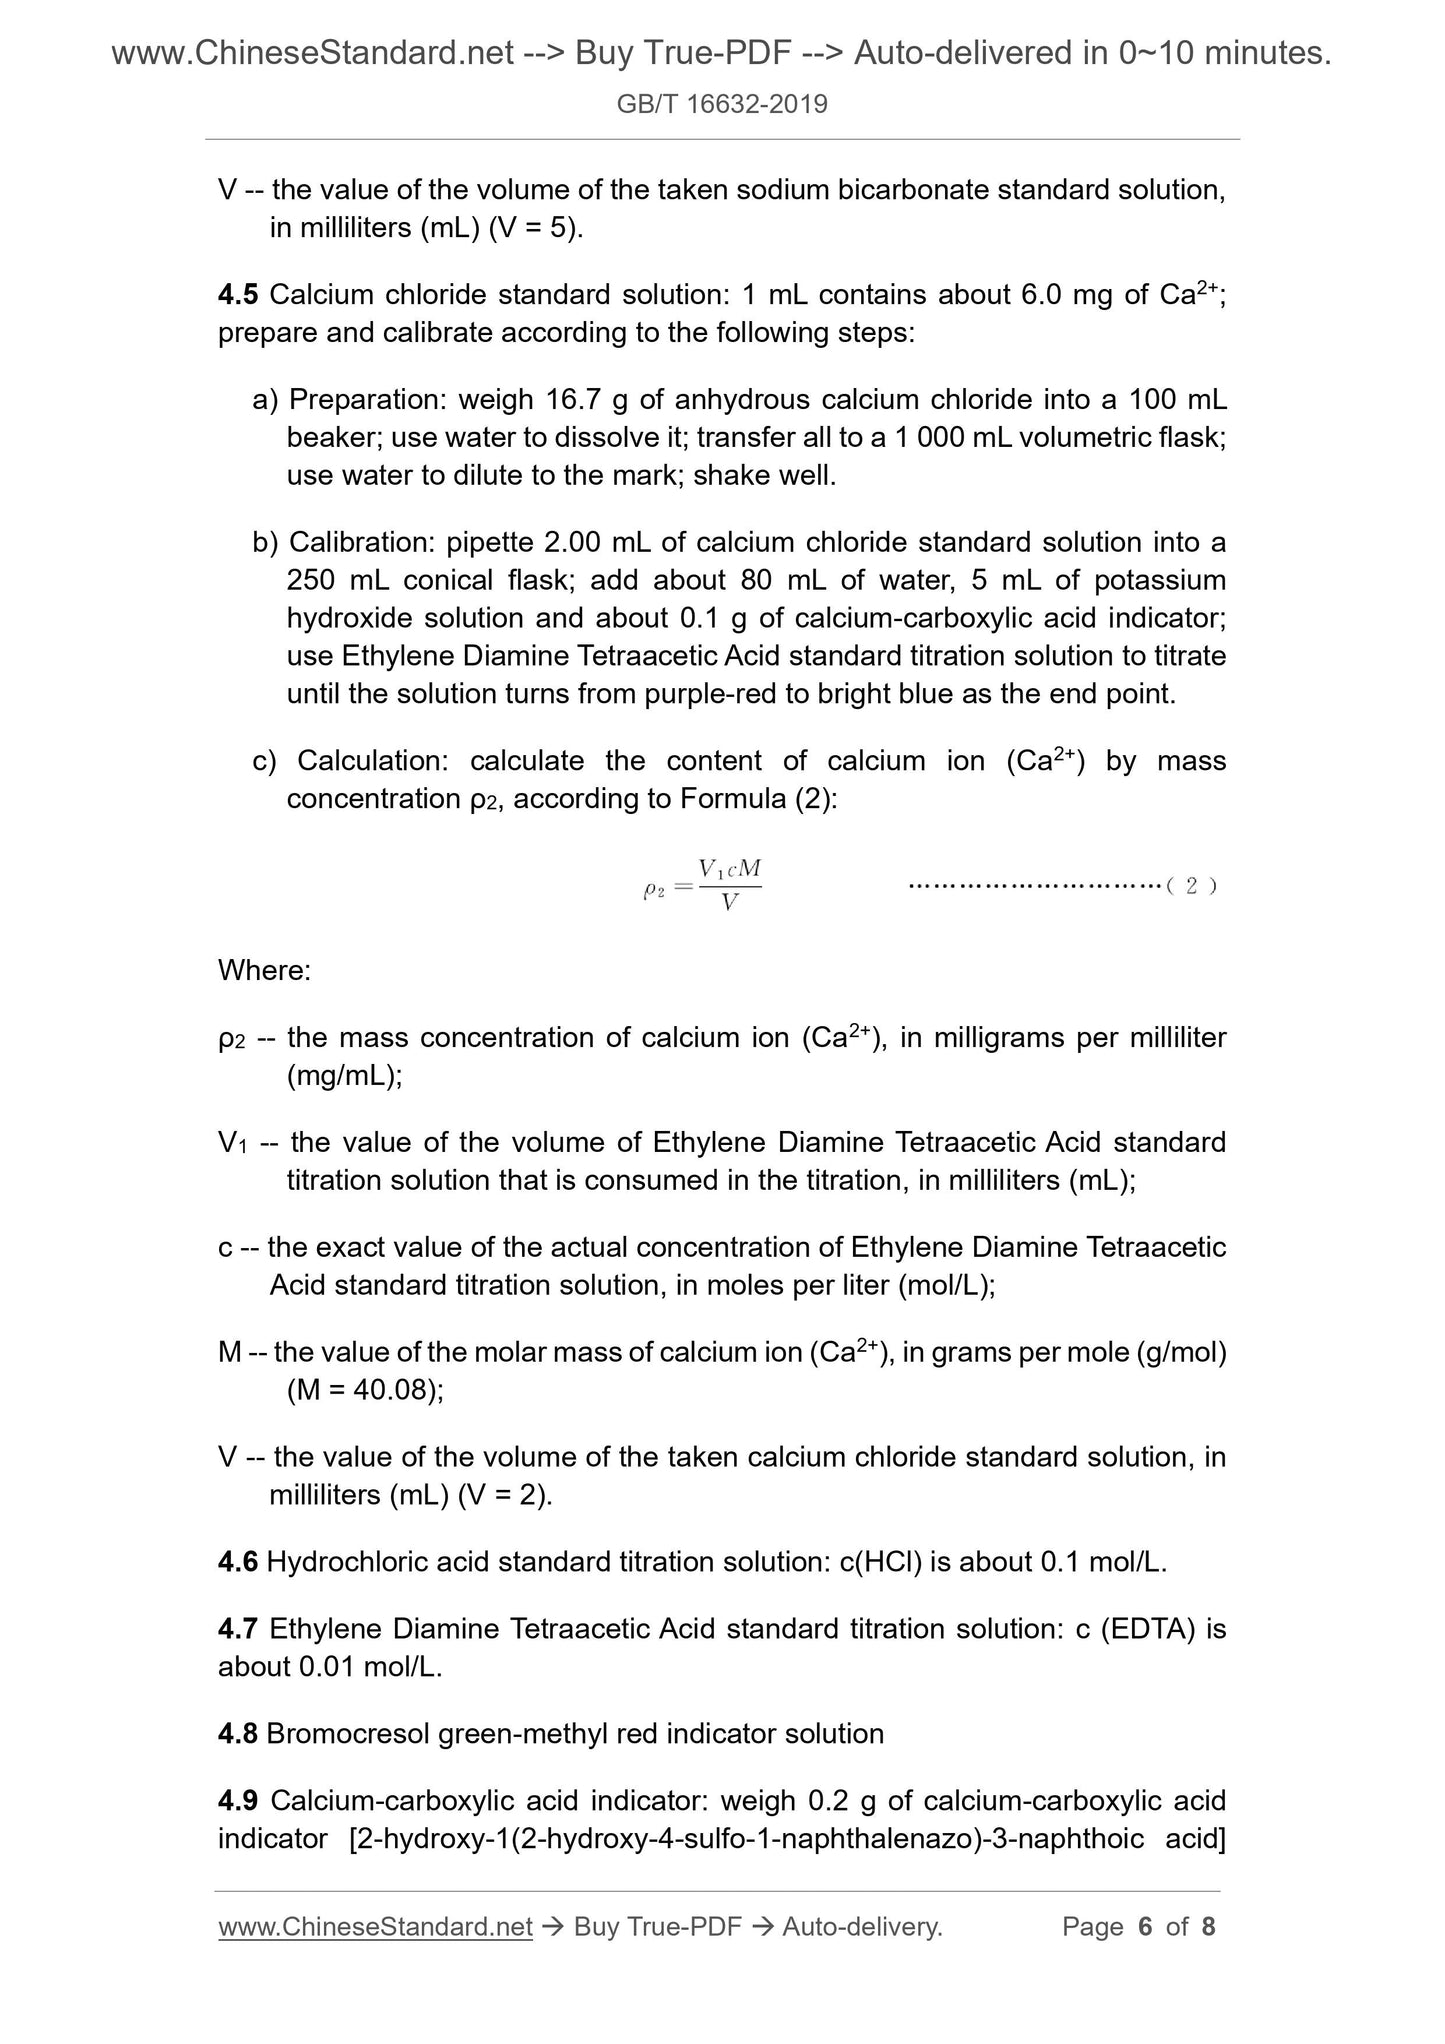 GB/T 16632-2019 Page 4